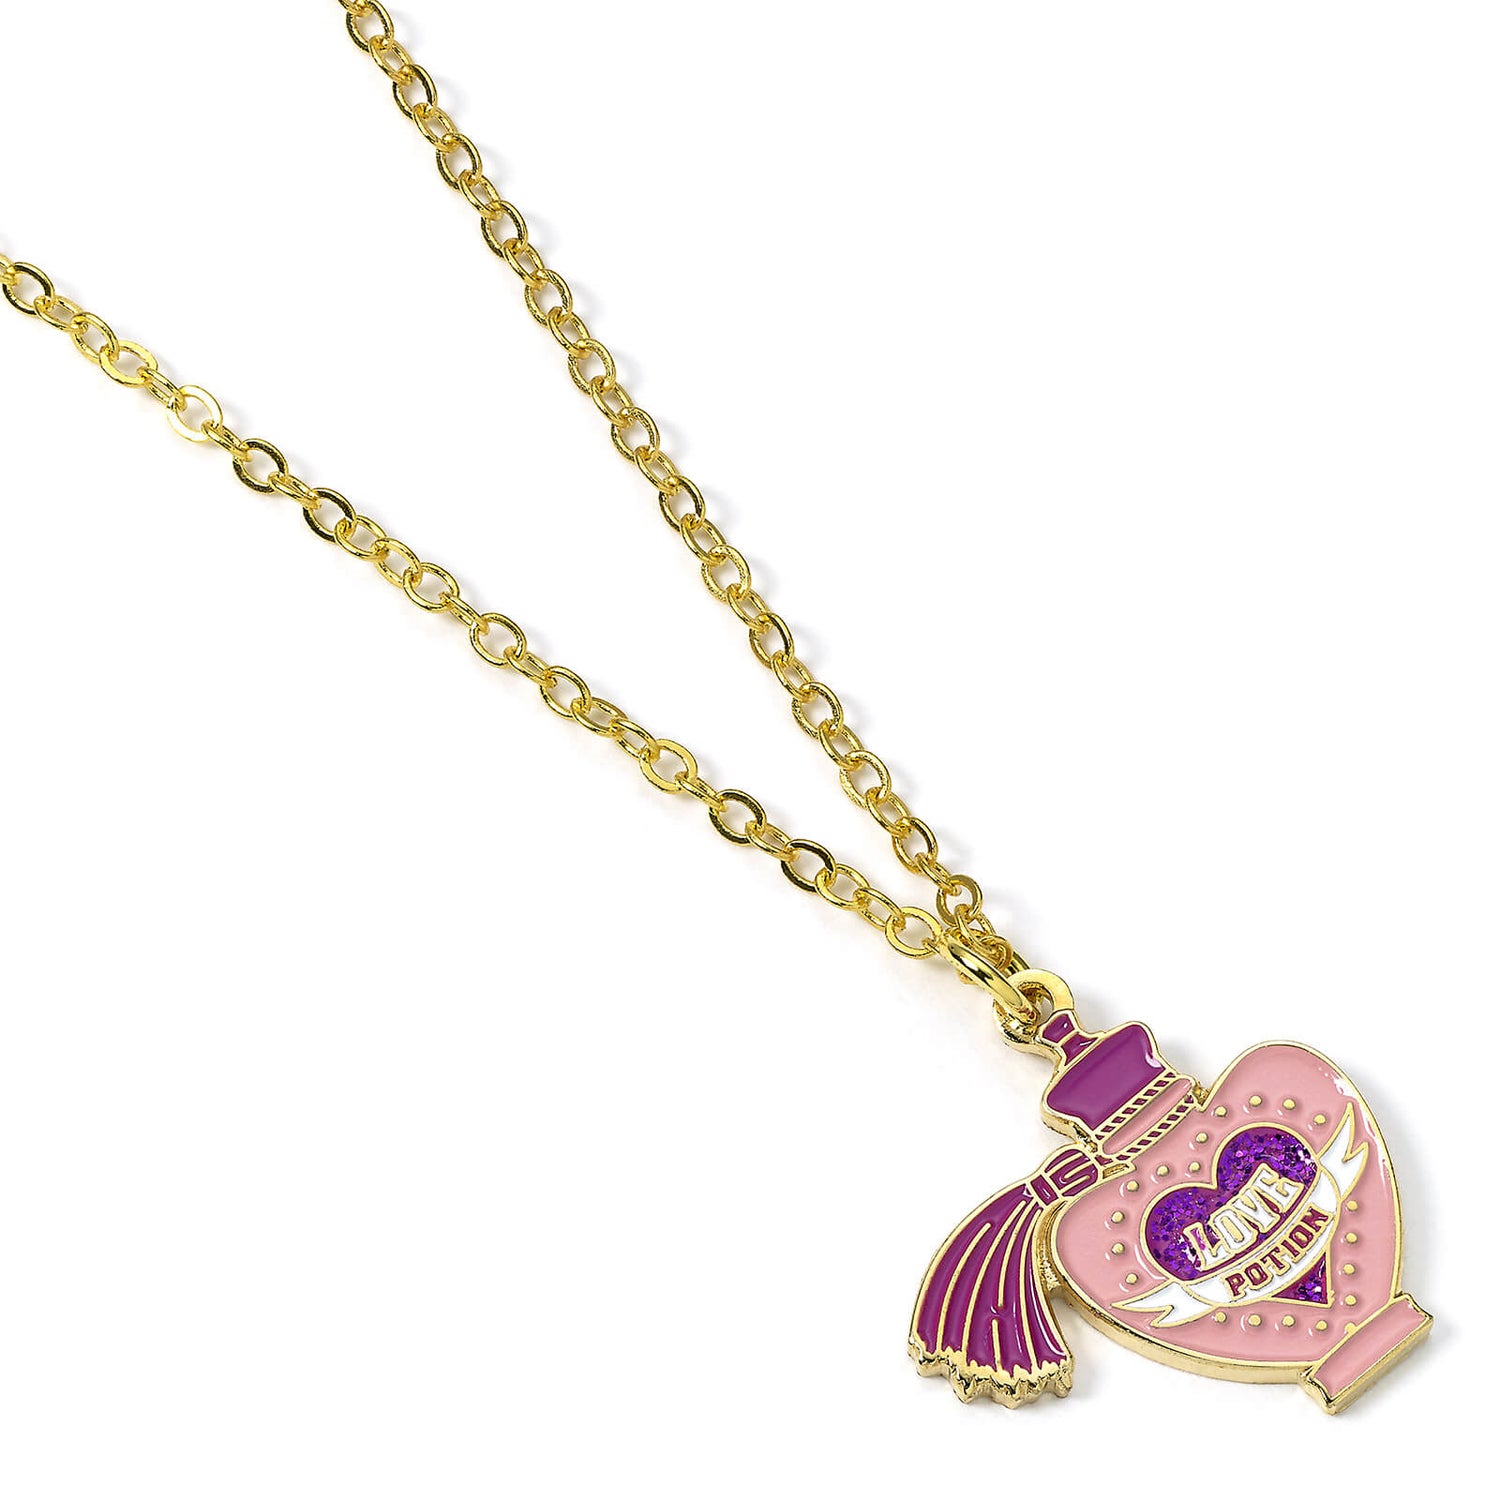 Harry Potter Gold plated Love Potion Necklace - Gold